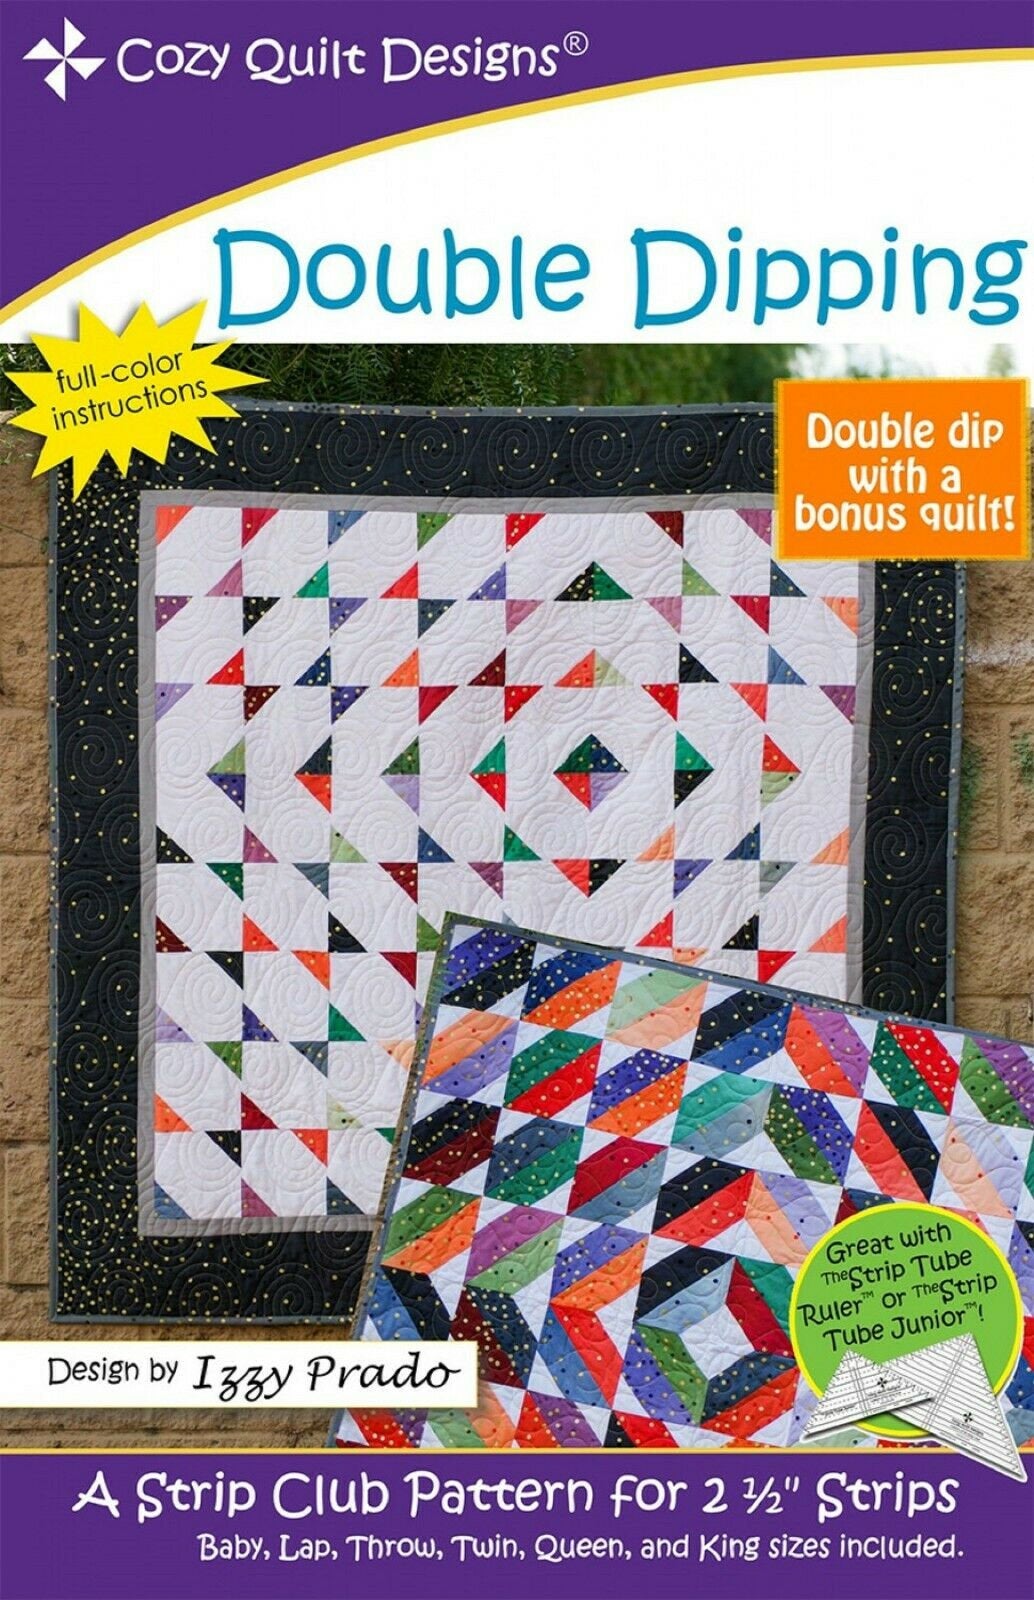 Double Dipping Quilt Pattern by Cozy Quilt Designs